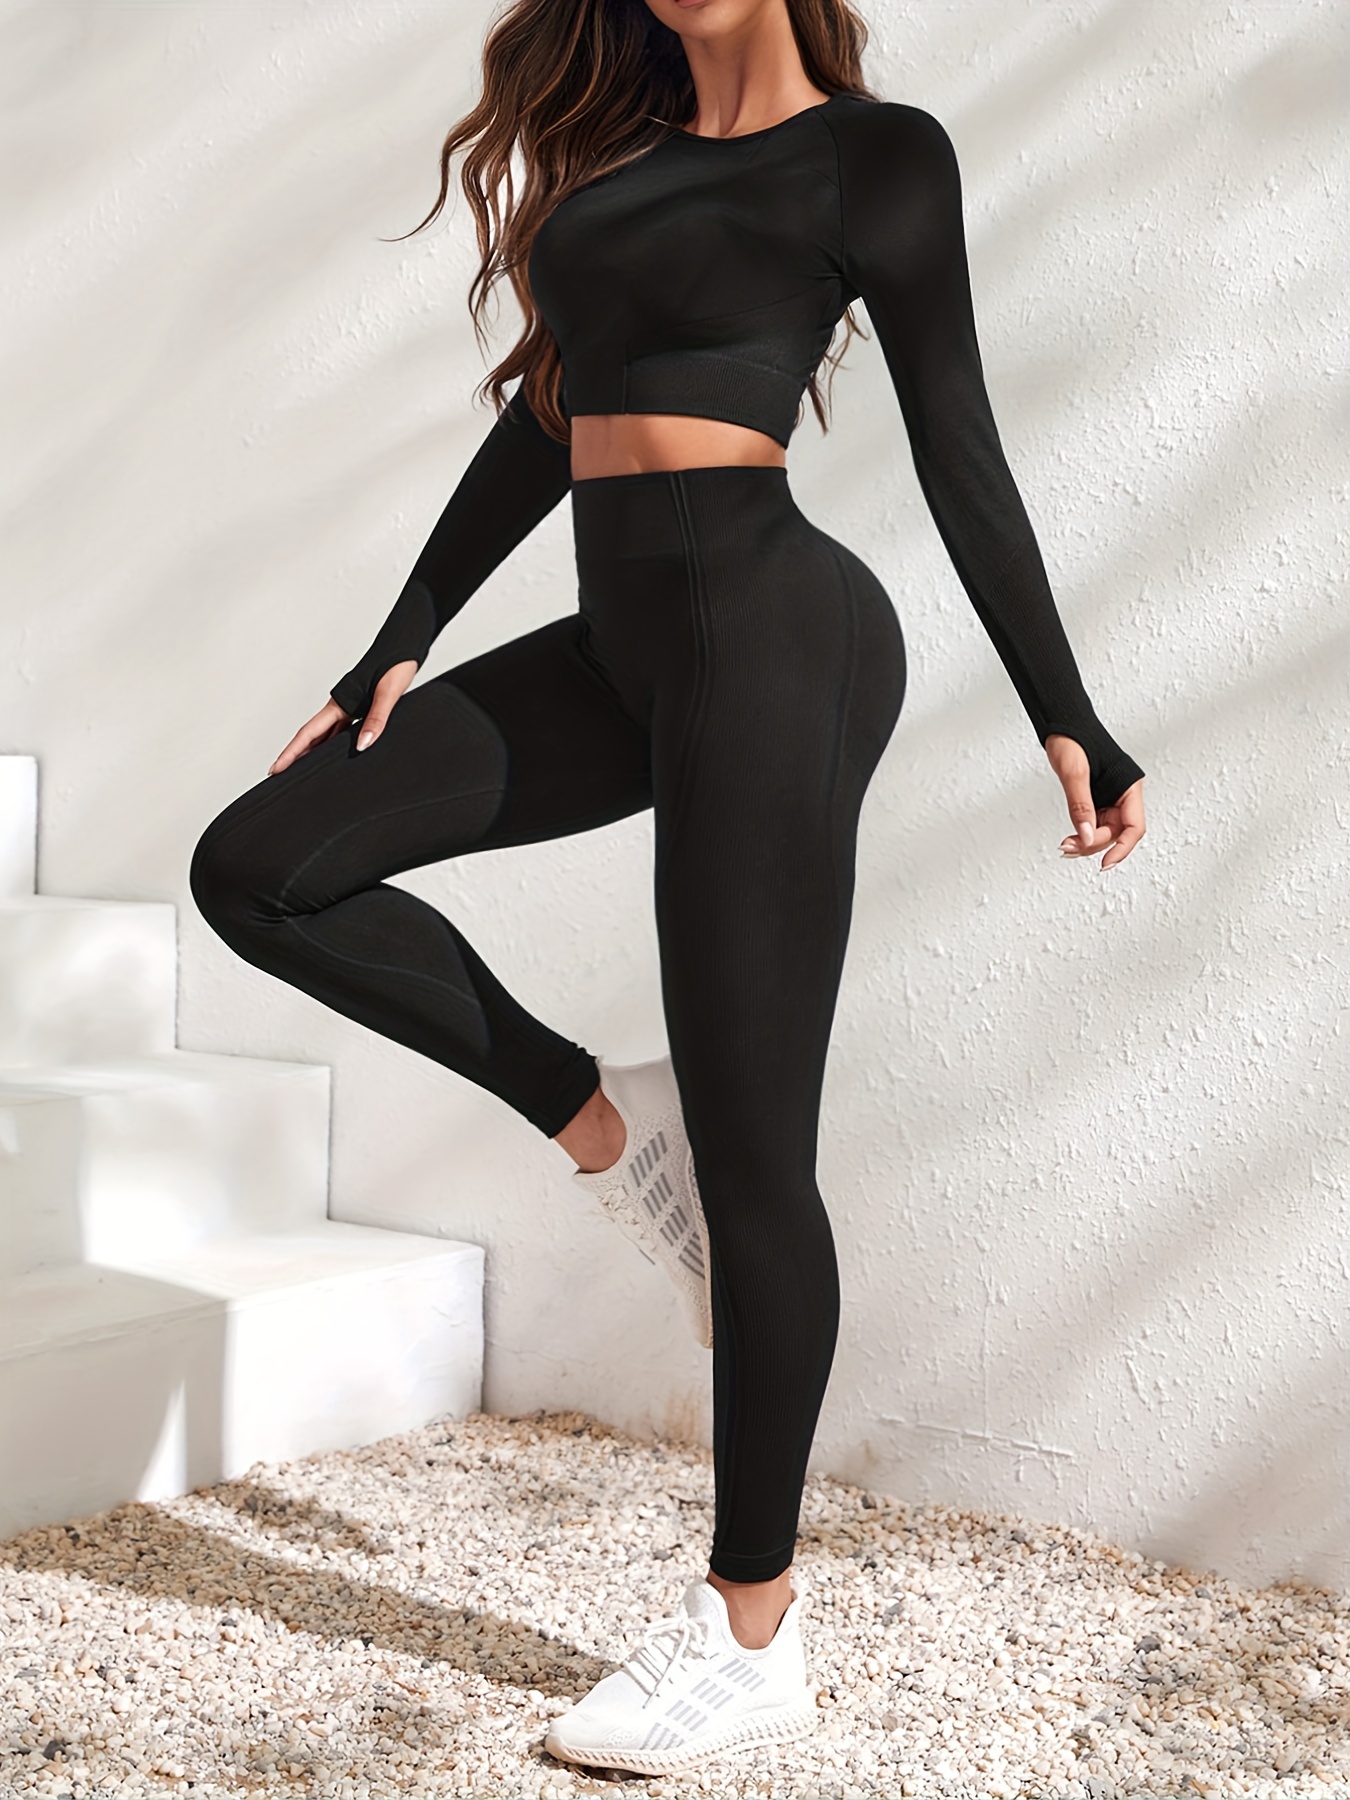 Women's Workout Sets 2 Piece Thumbhole Solid Color Clothing Suit Dark Grey  Black Spandex Yoga Fitness Gym Workout Tummy Control Butt Lift Breathable L